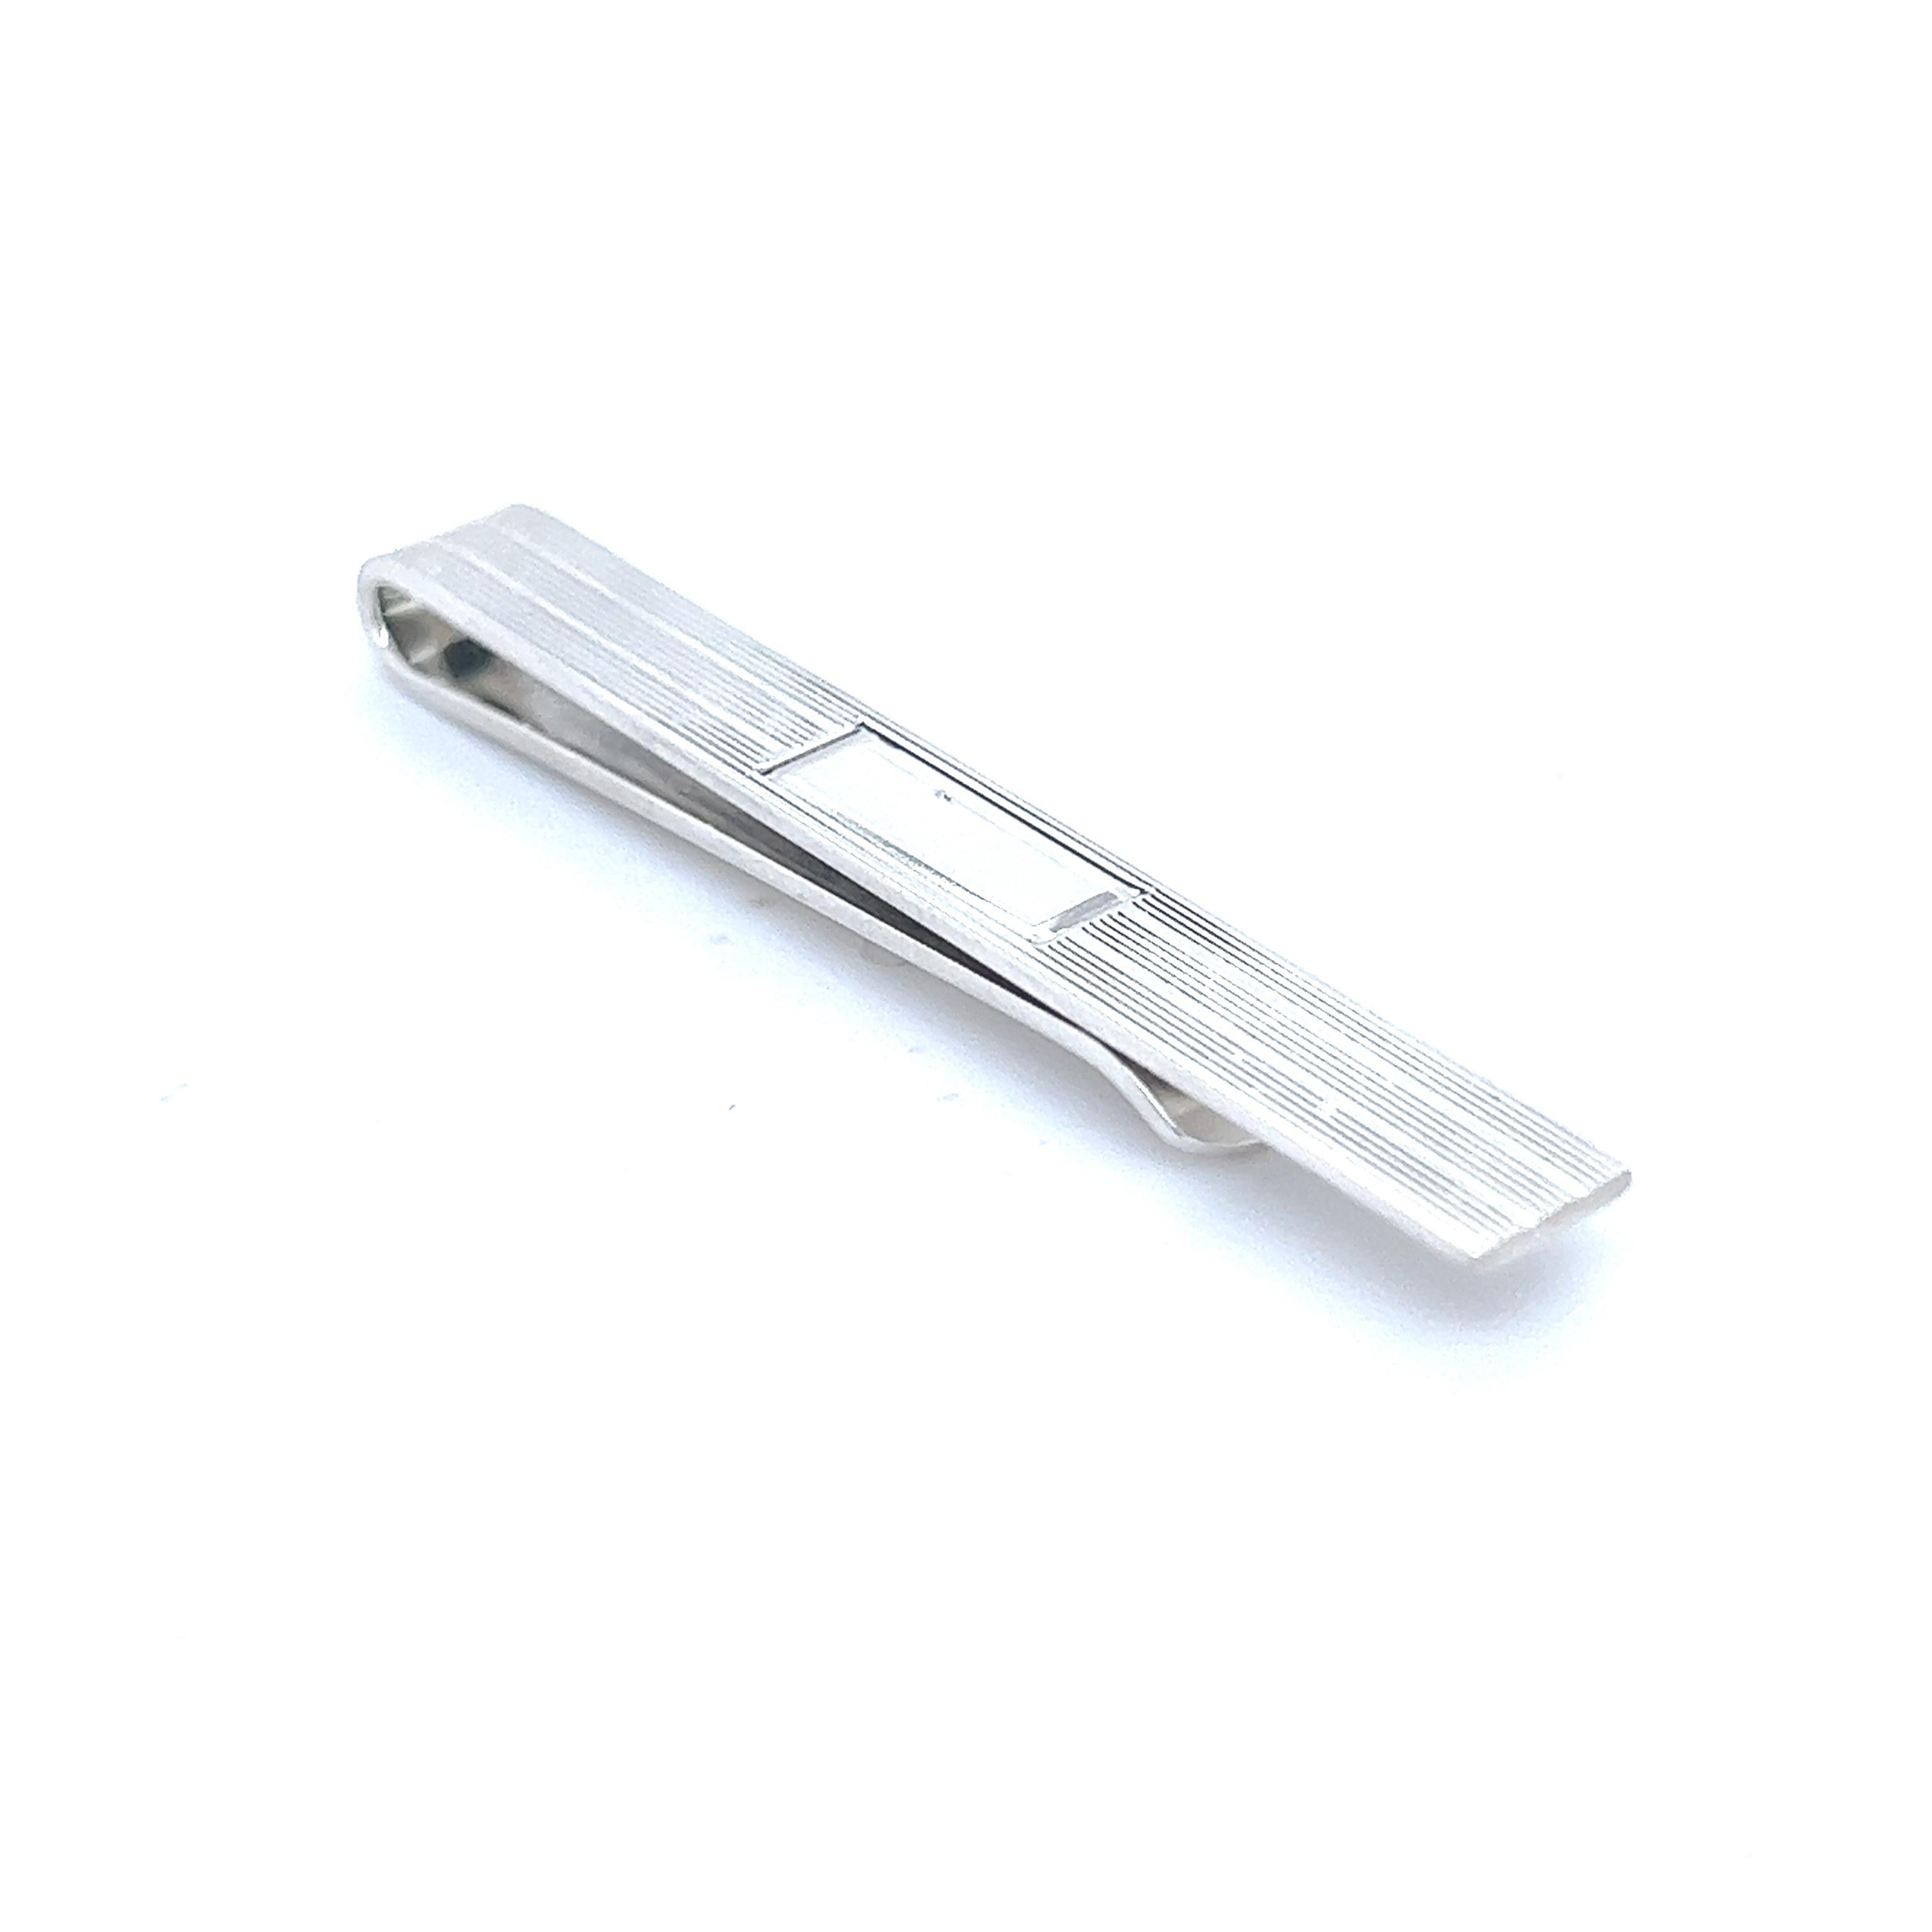 Tiffany & Co Estate Mens Tie Clip Silver TIF445

This elegant Authentic Tiffany & Co Estate tie clip is made of sterling silver and has a weight of 6.7 Grams.

TRUSTED SELLER SINCE 2002

PLEASE SEE OUR HUNDREDS OF POSITIVE FEEDBACKS FROM OUR